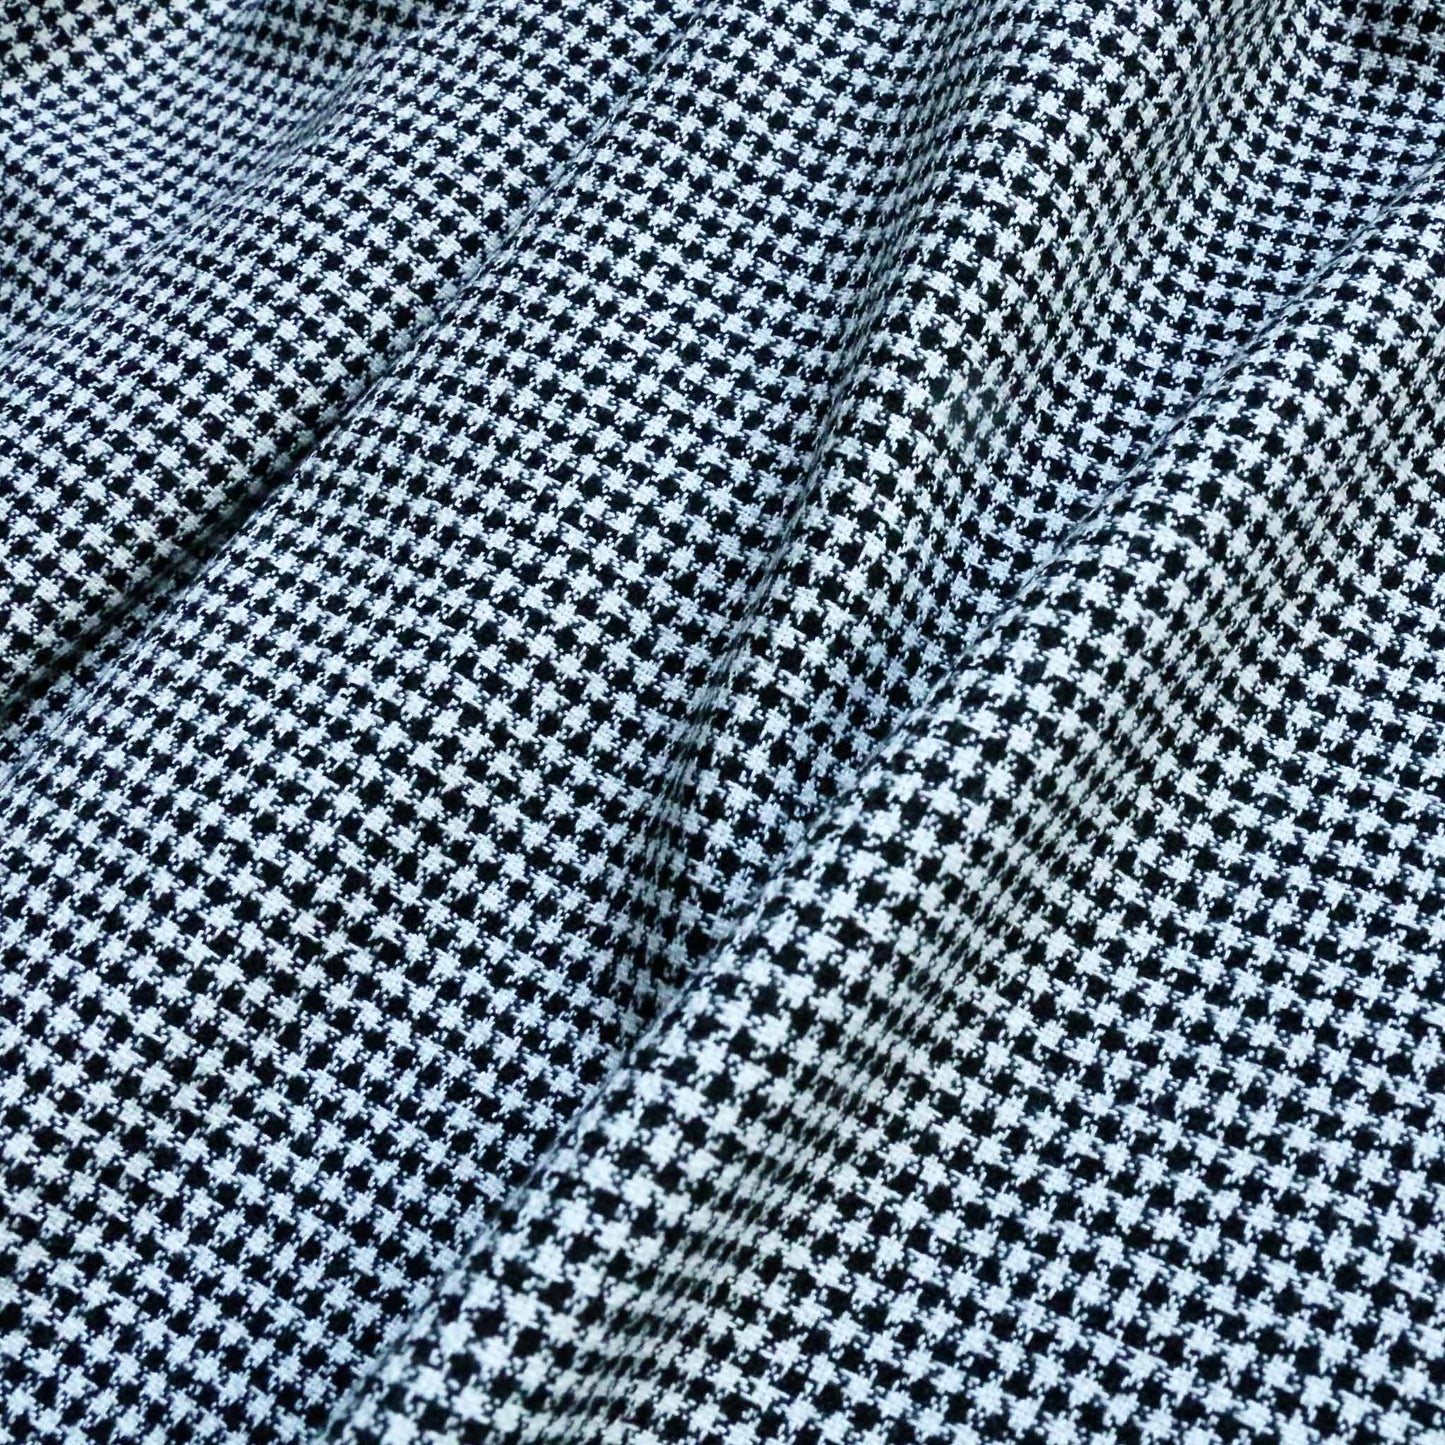 viscose crepe dressmaking fabric with black and white check design